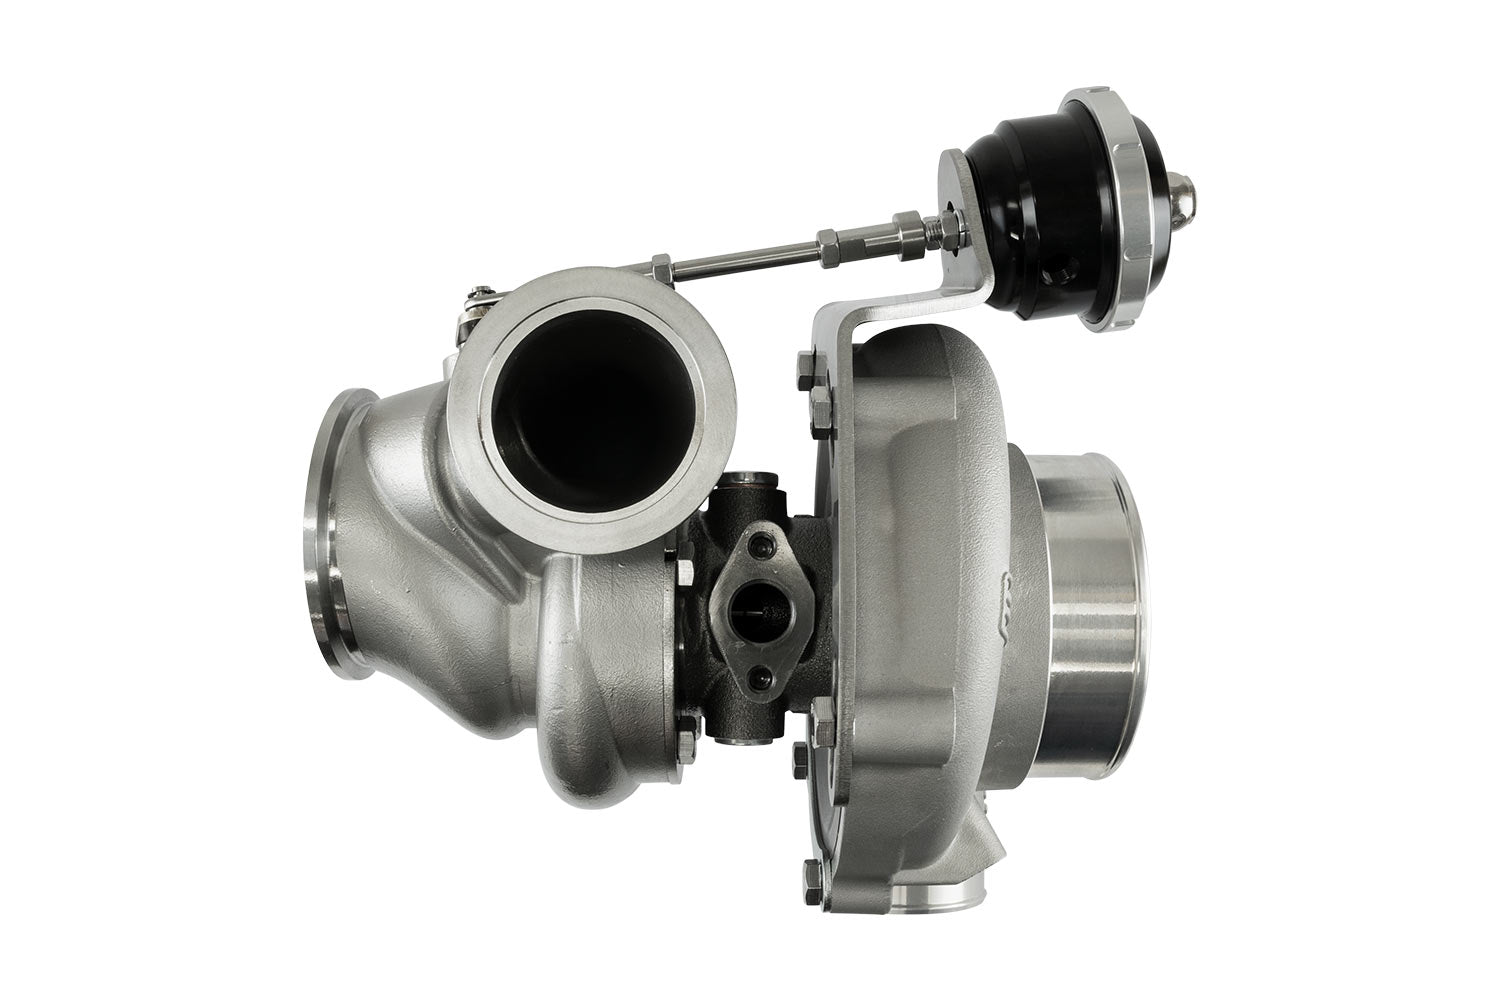 TS-2 Performance Turbocharger (Water Cooled) 6466 V-Band 0.82AR Internally Wastegated